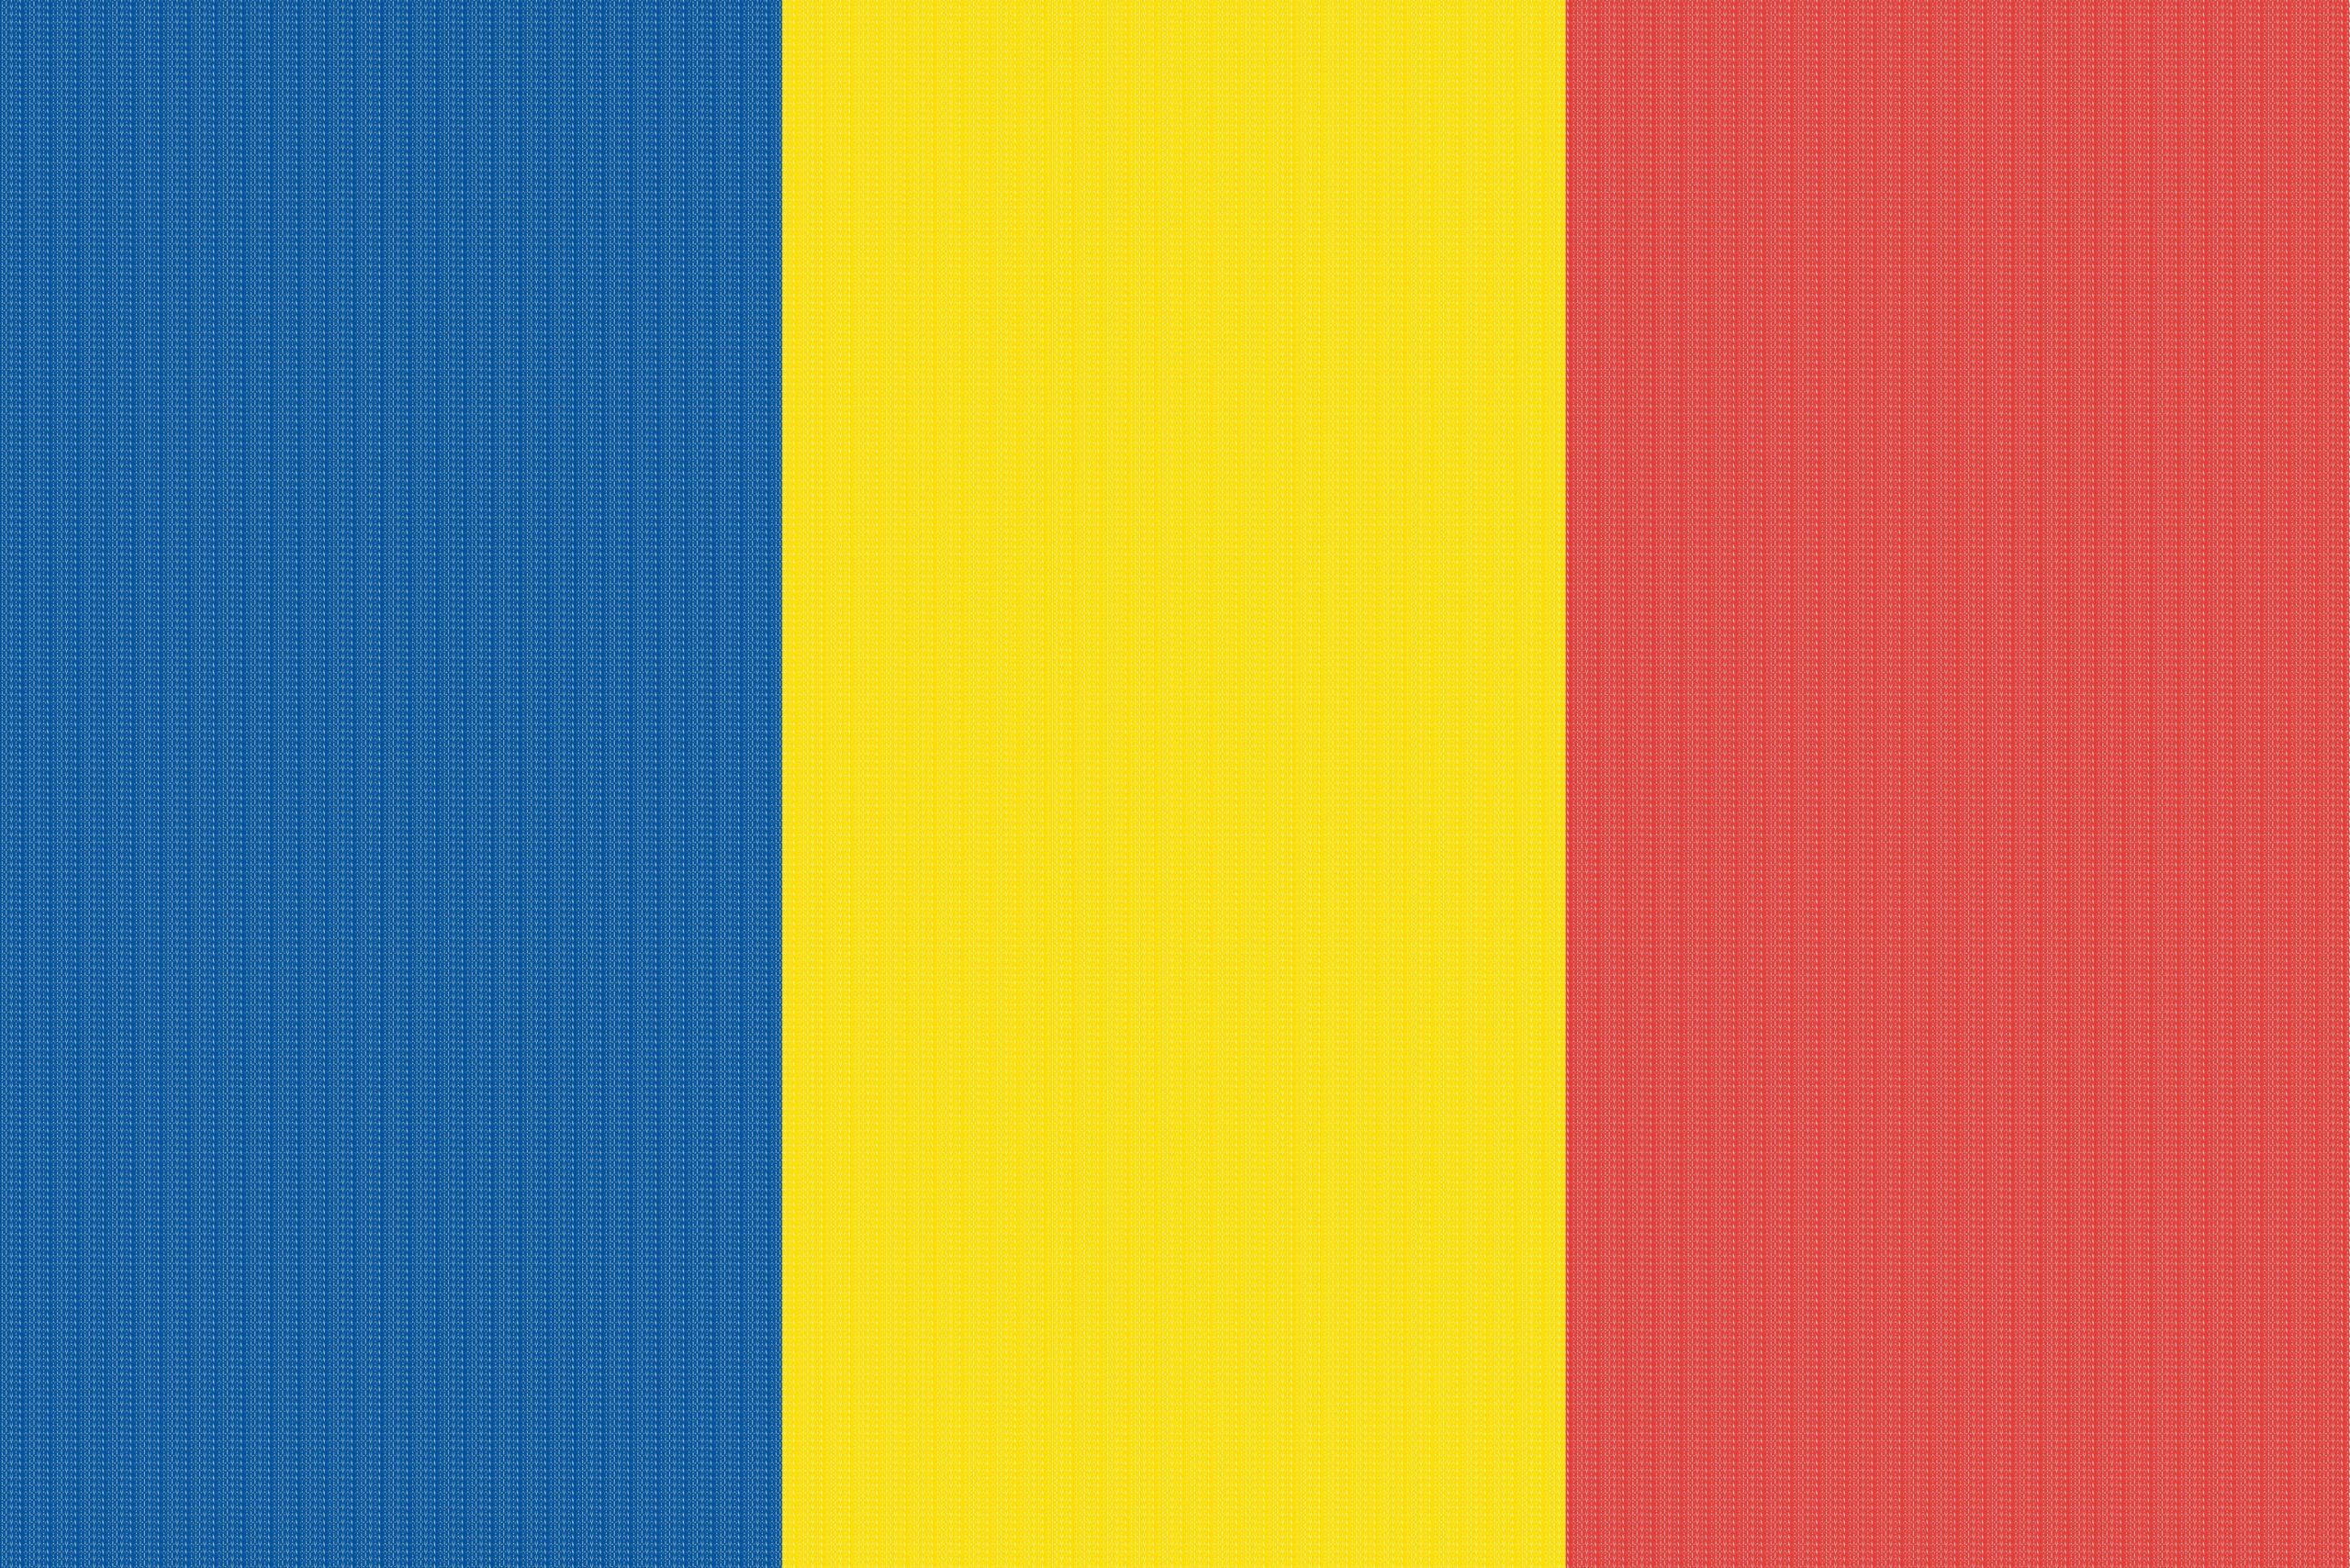 Romania Flag Typography by GELO